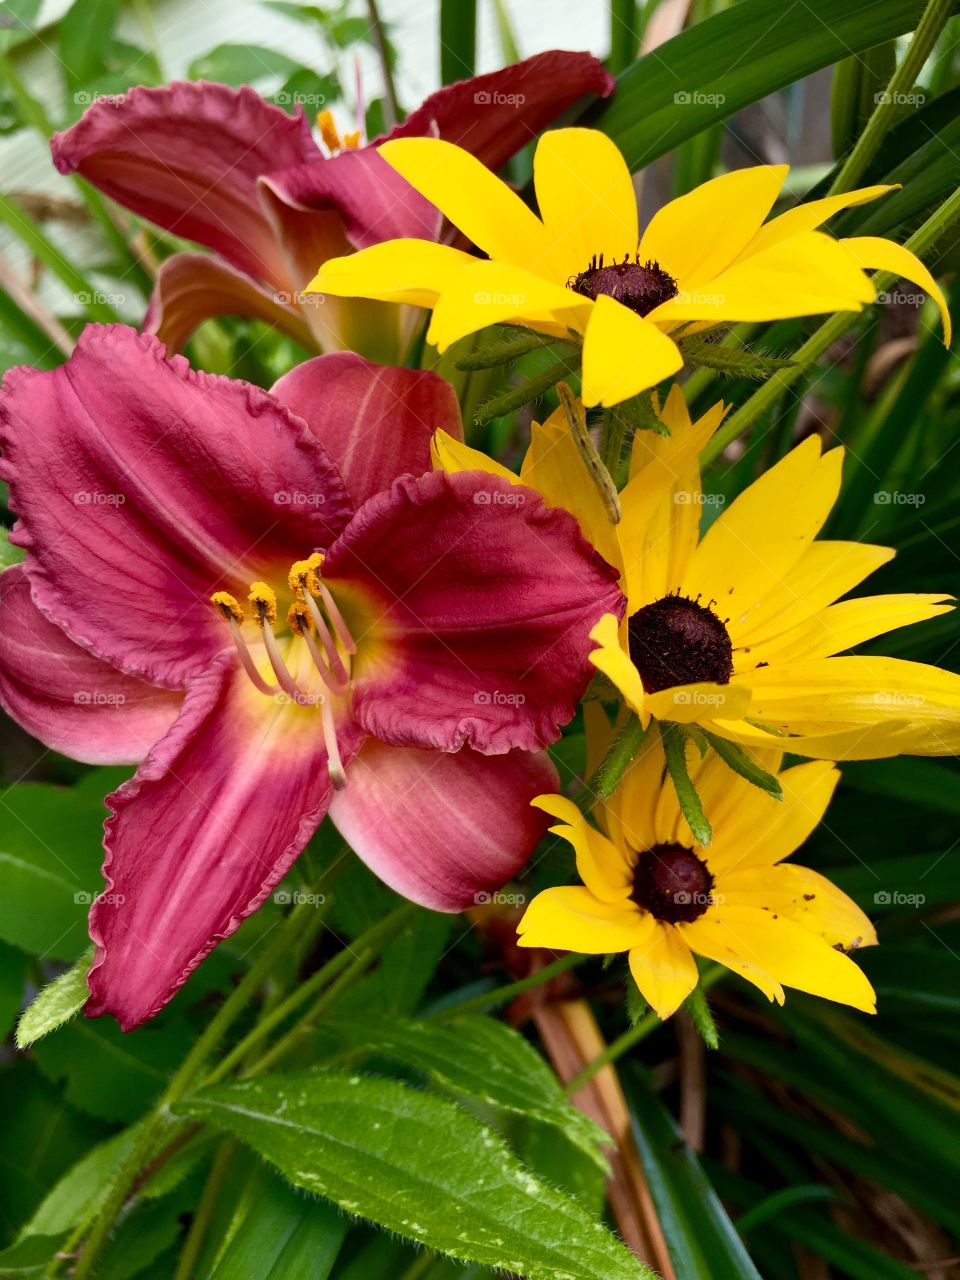 Lilies and Black Eyed Susan bloom side by side, with no care as to color or shape, basking in the beauty all around them.